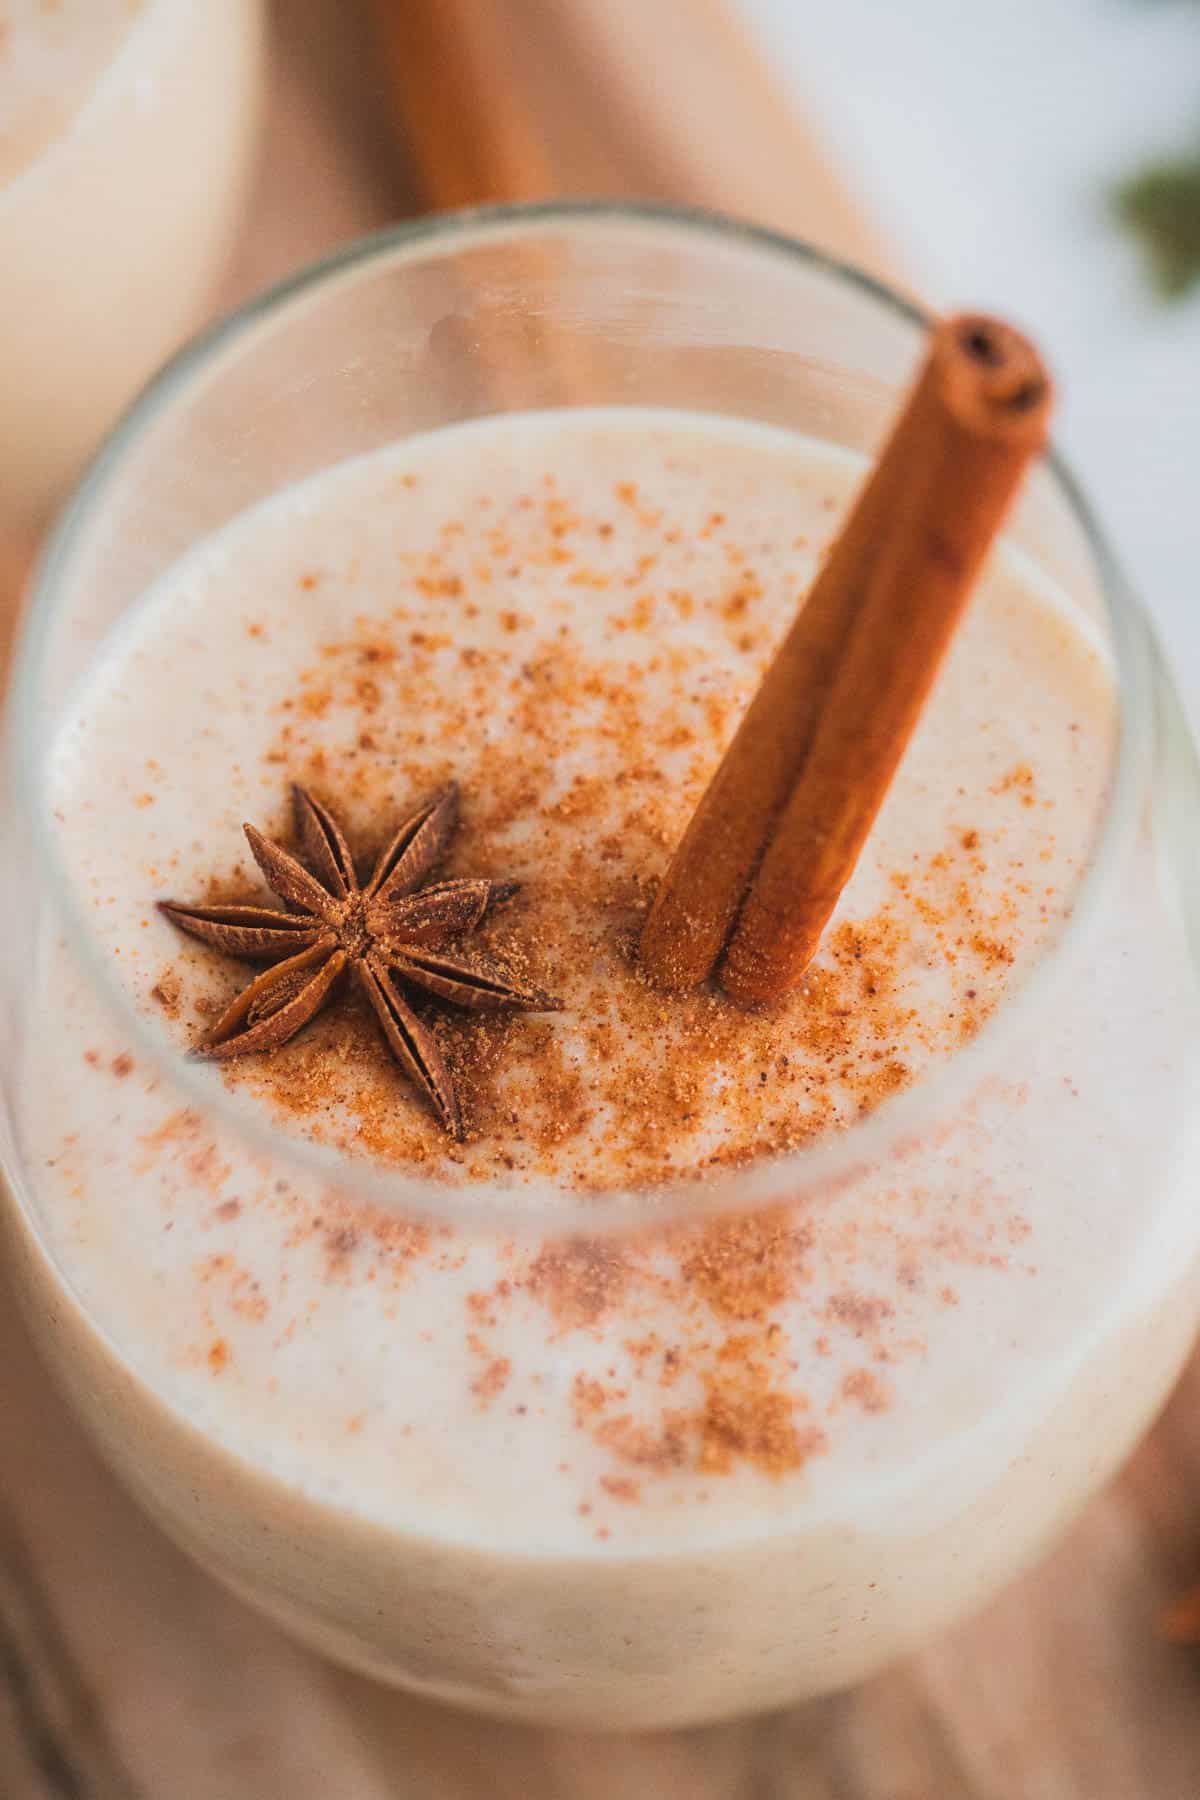 Coquito topped with star anise and cinnamon stick.